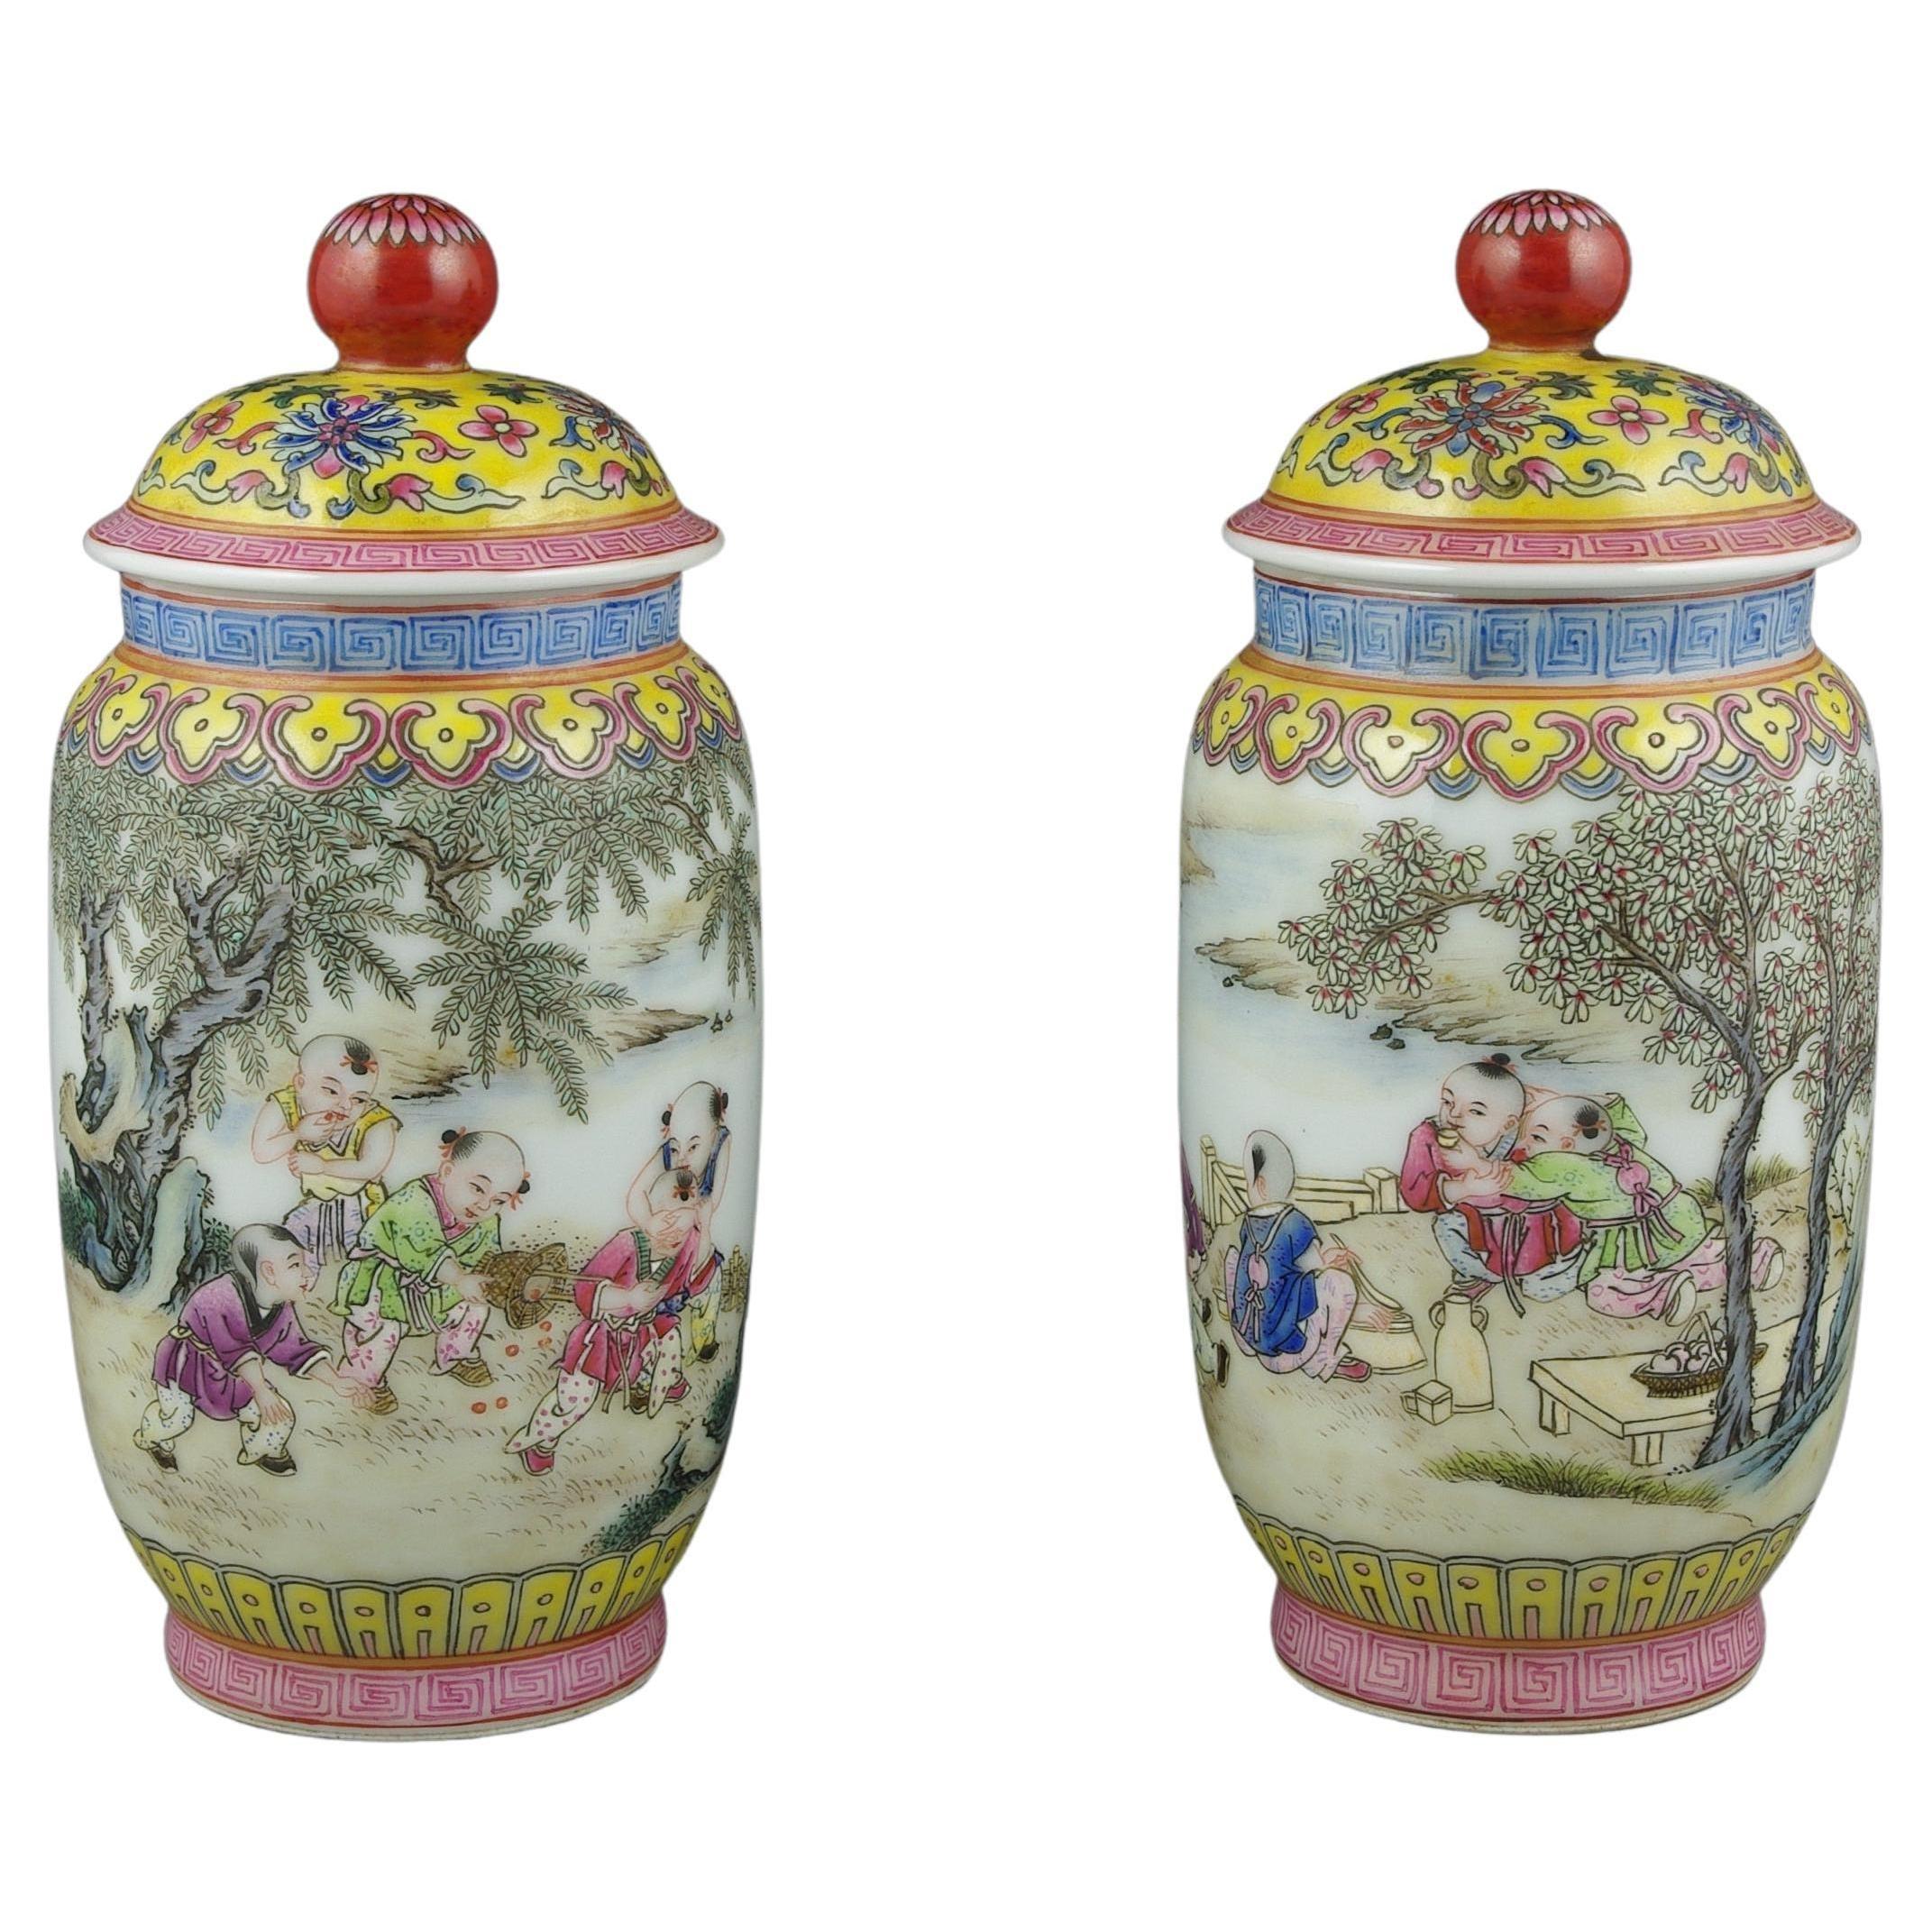 Finest Chinese Porcelain Fencai Covered Jars Children Playing Qing Style 20c  For Sale